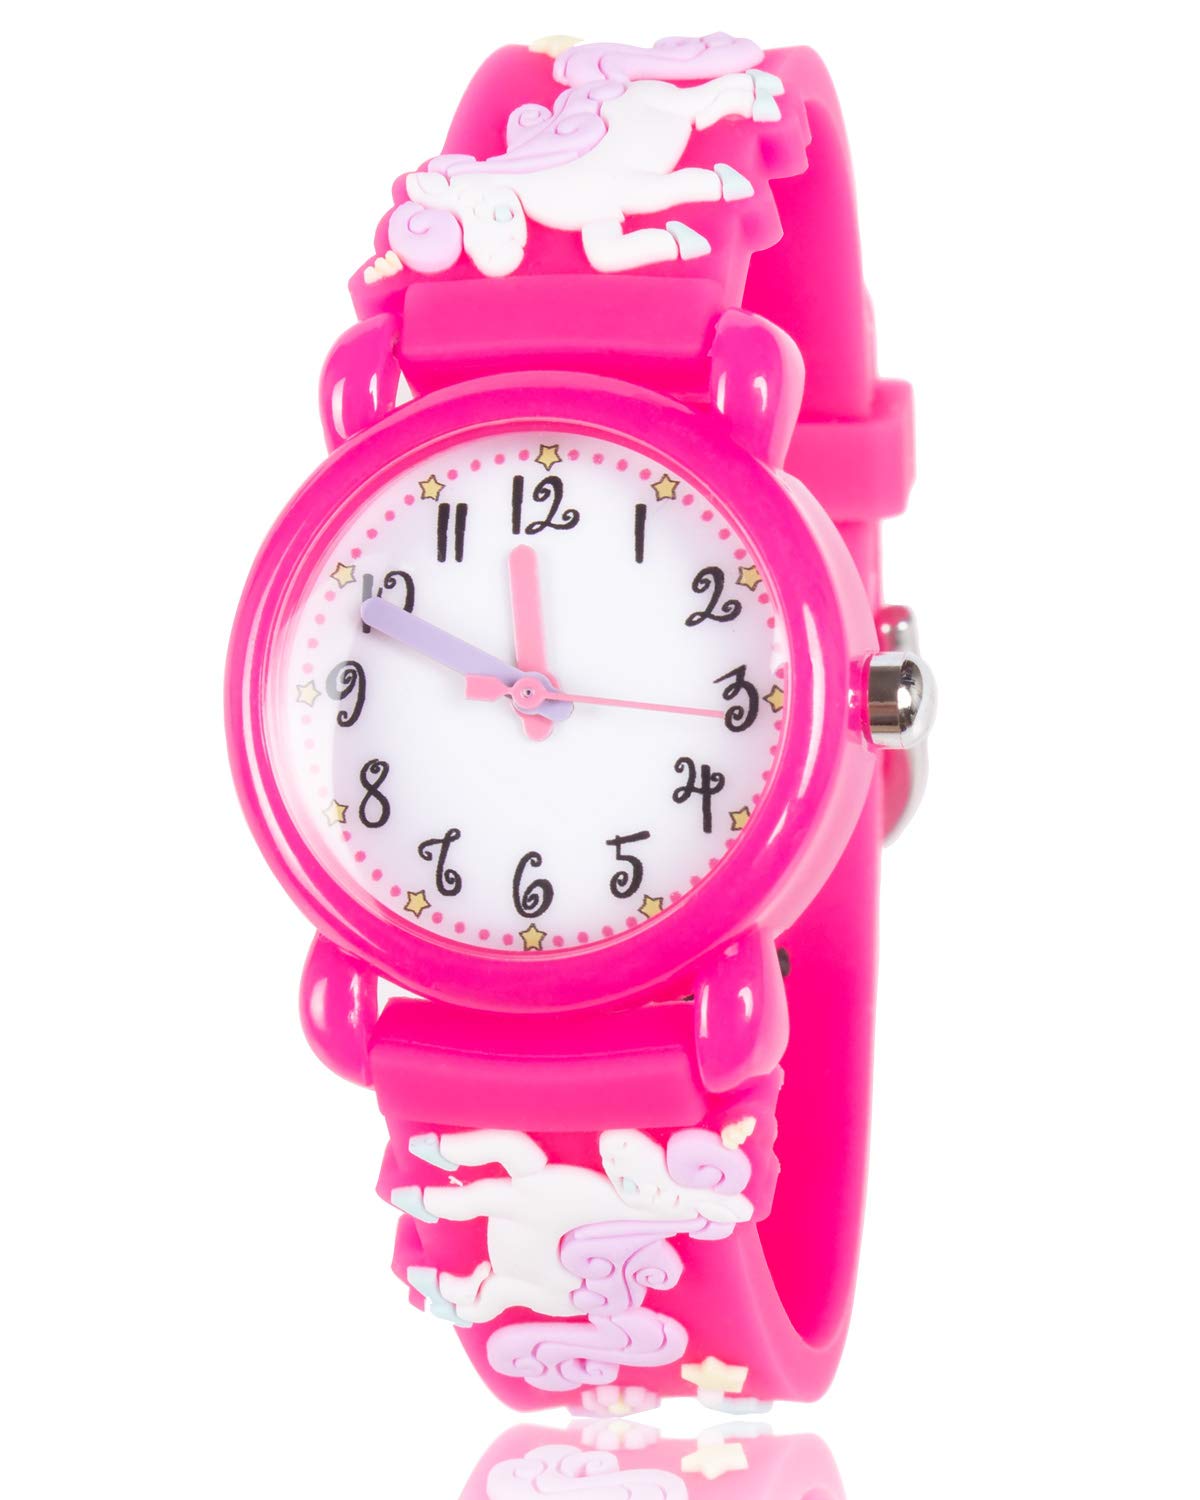 3D Unicorn Kids Watch for Girls, Toys for 3 4 5 6 7 Year Old Girls Best Gifts for Girls Boys Age 3-8